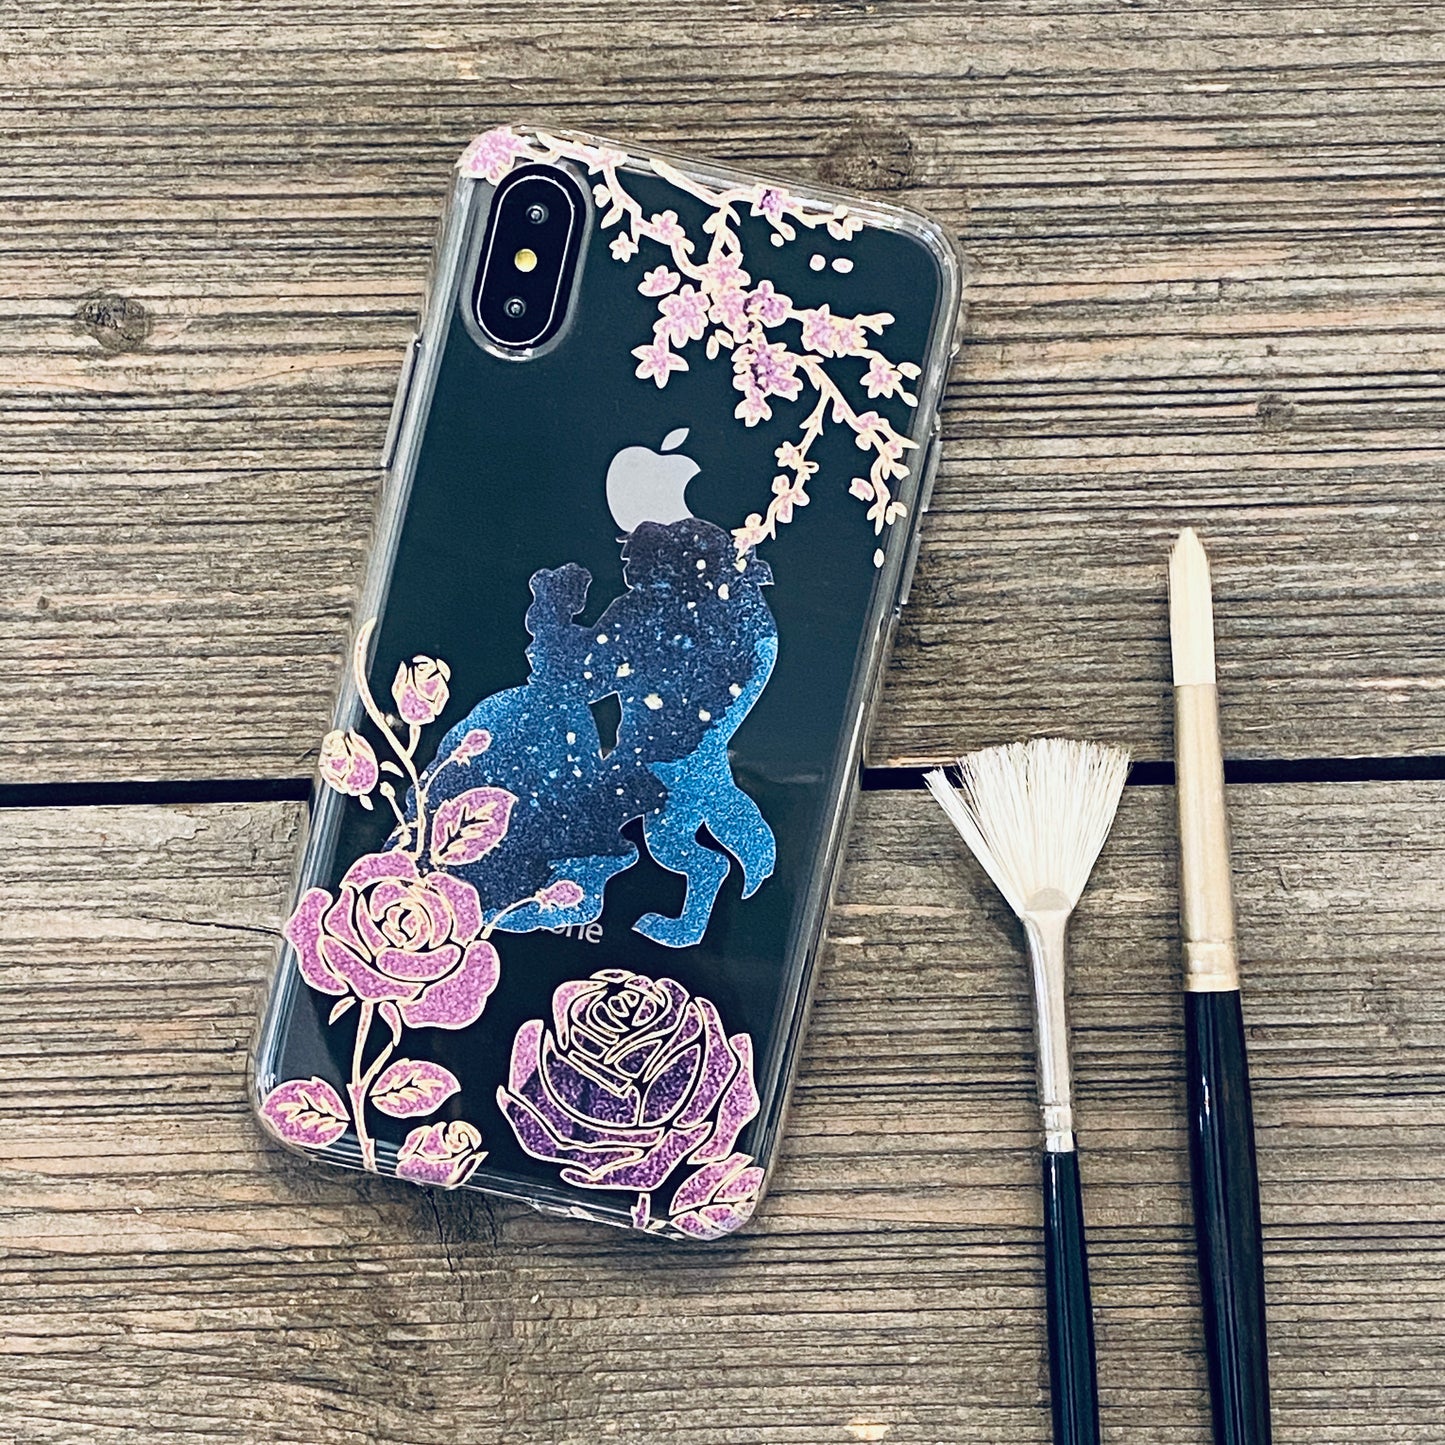 tale as old as time phone case